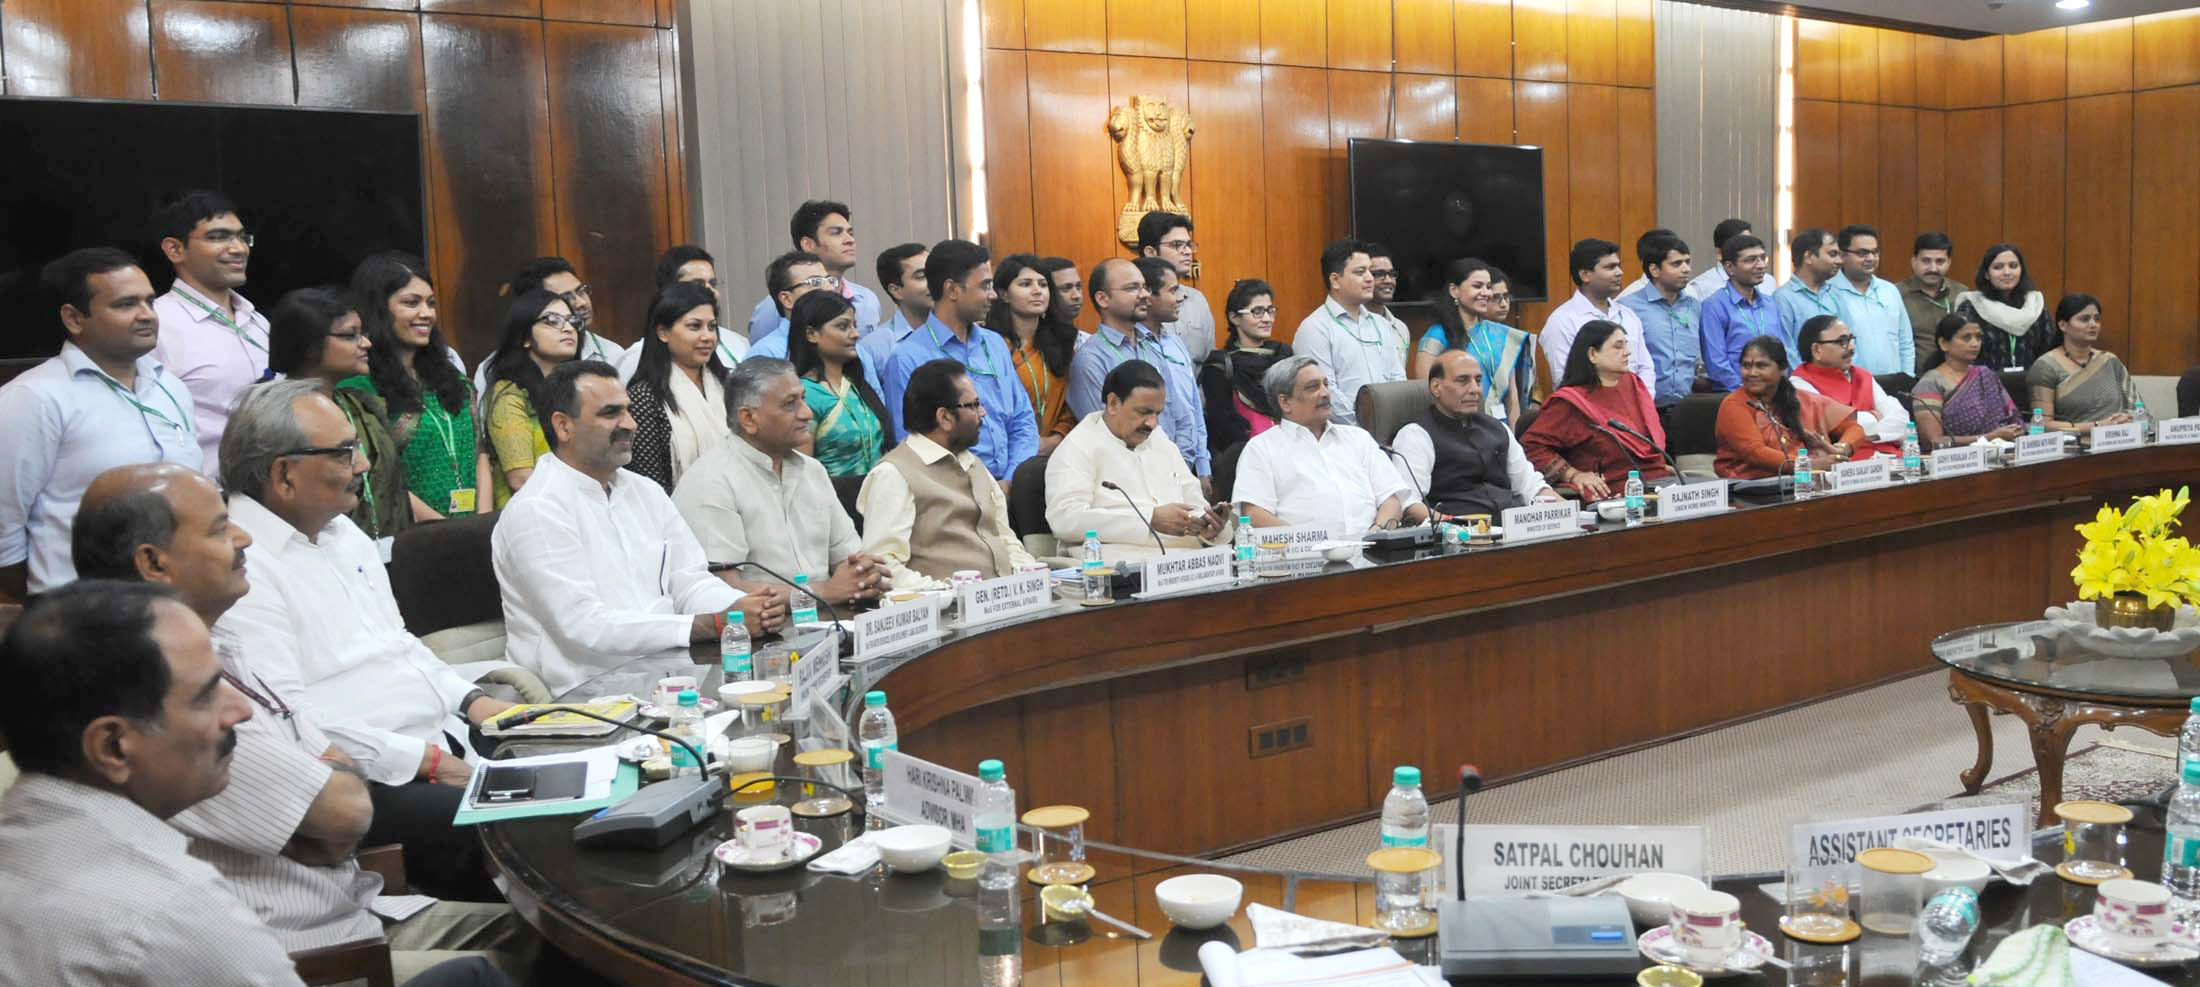 A group of IAS Probationers of Uttar Pradesh cadre (2014 Batch) as well as Probationers who are domicile of Uttar Pradesh, presently posted in various Ministries/Departments as Assistant Secretaries, participated in an interactive session with the Union Ministers led by the Union Home Minister, Shri Rajnath Singh, in New Delhi on October 19, 2016.